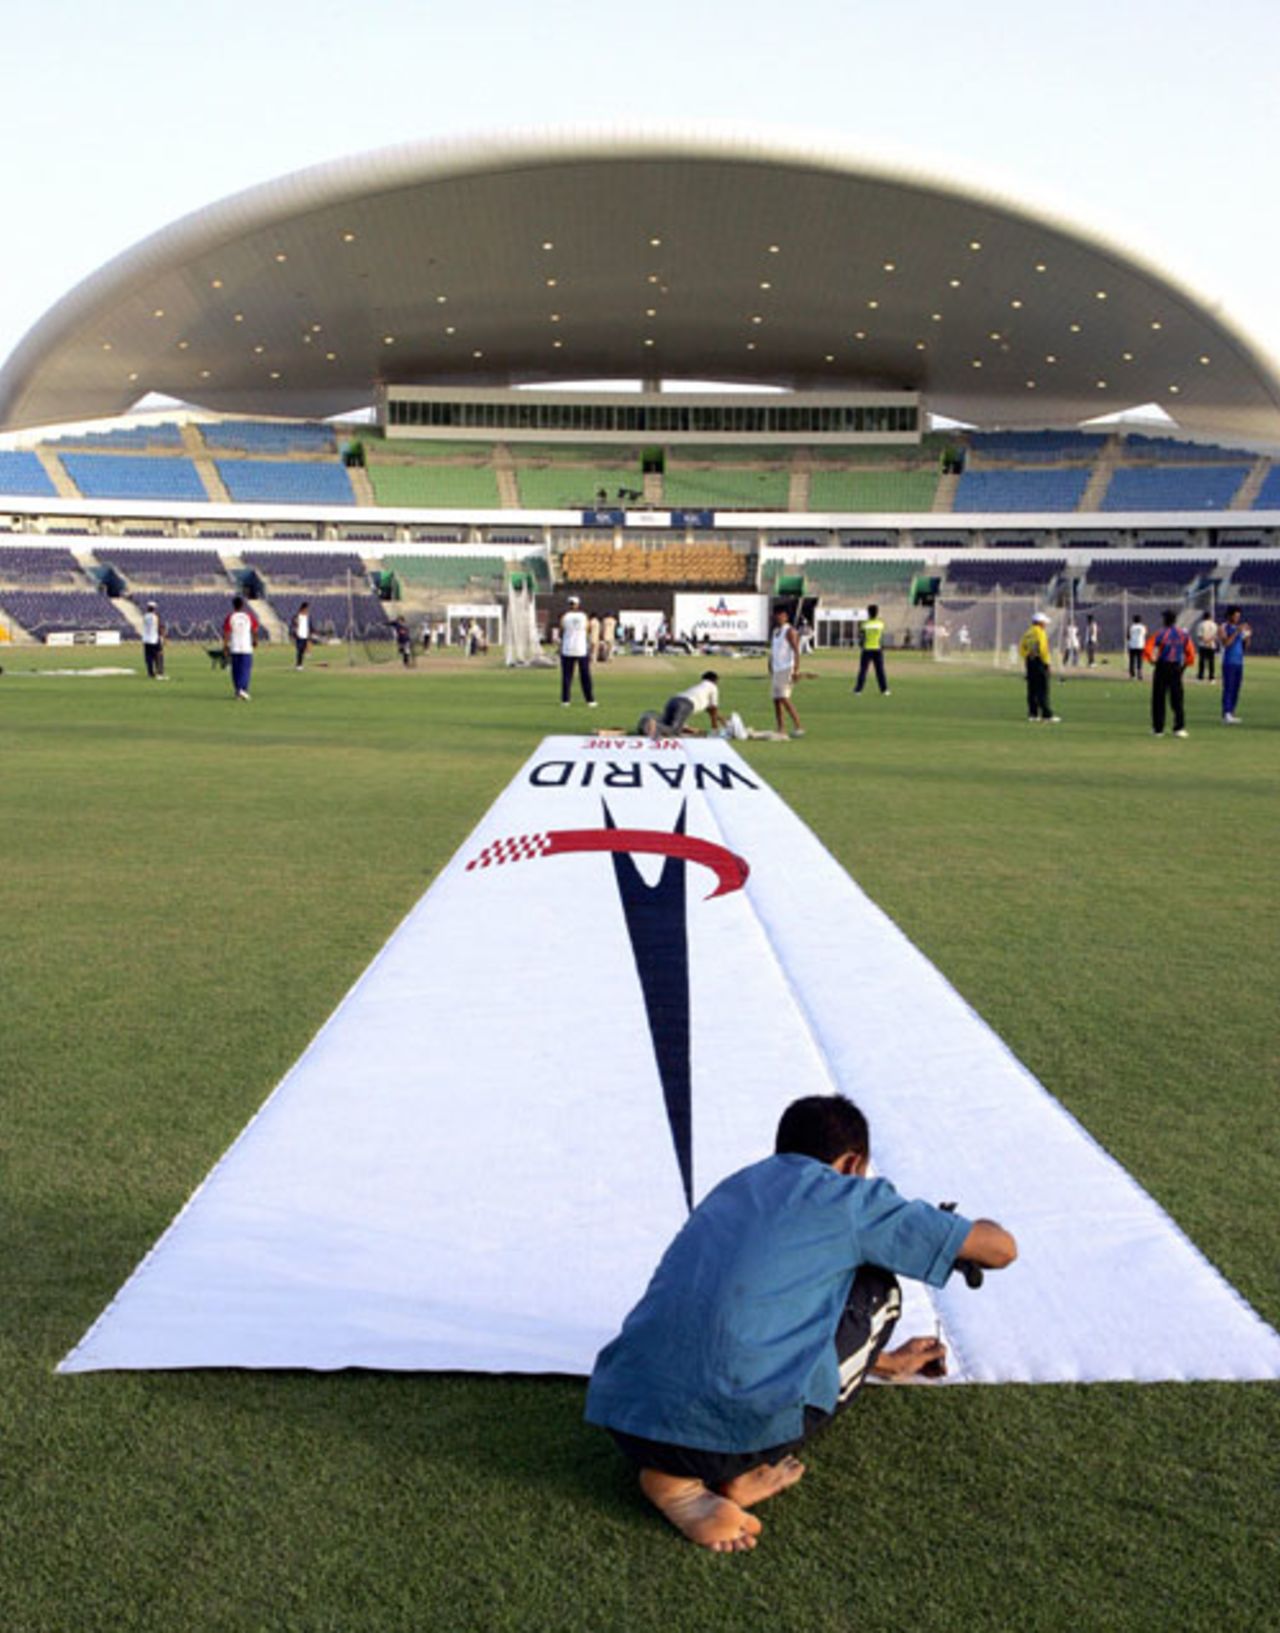 Last-minute preparations to the pitch ahead of the opening game, Abu Dhabi, May 17, 2007